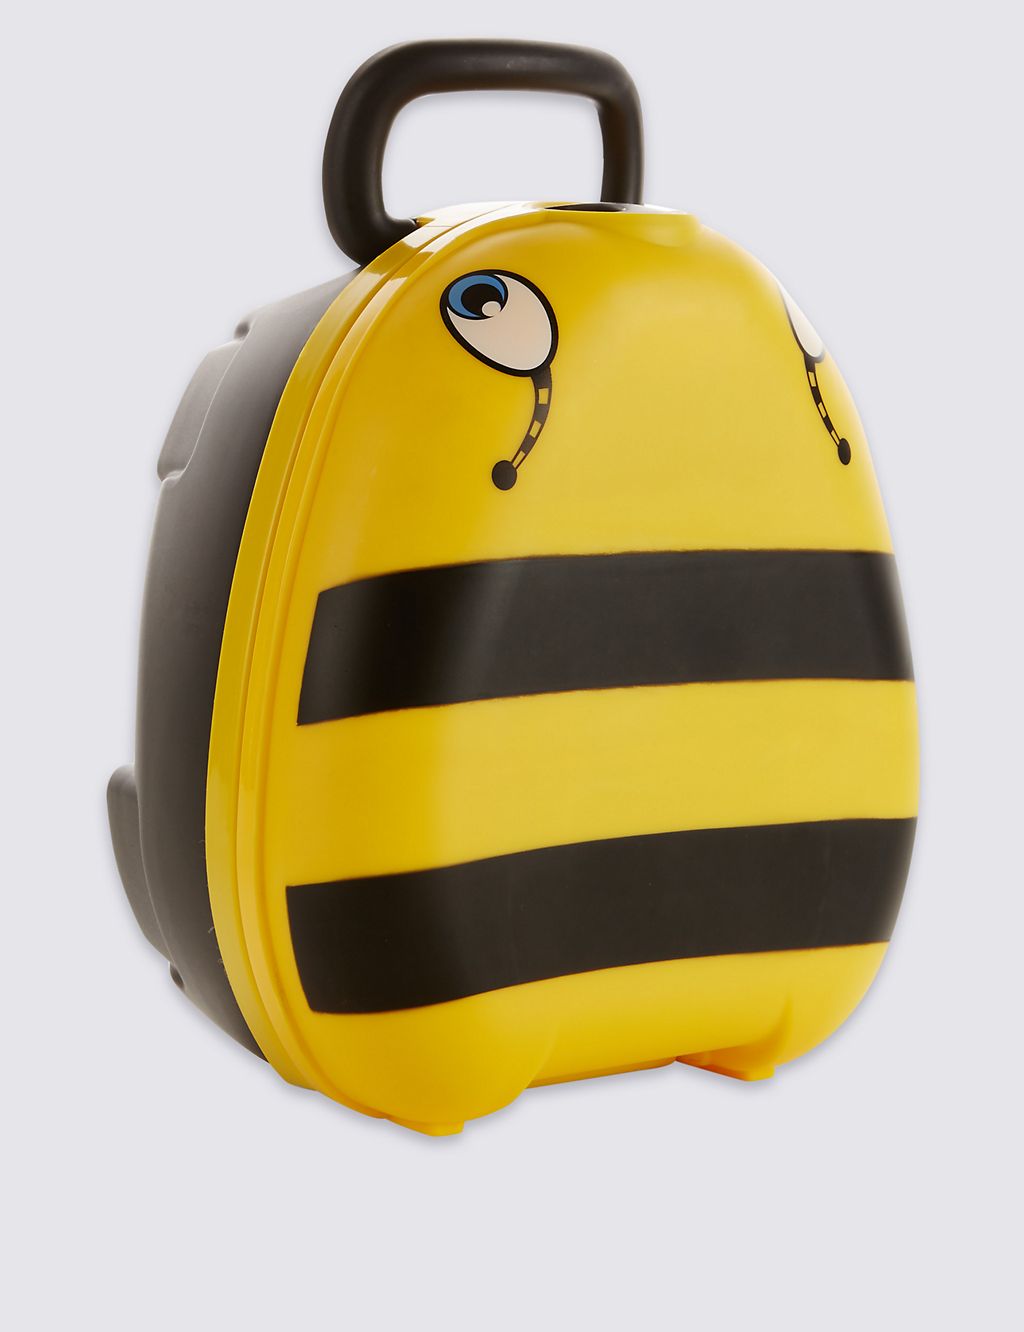 Carry Potty Bumble Bee 3 of 3